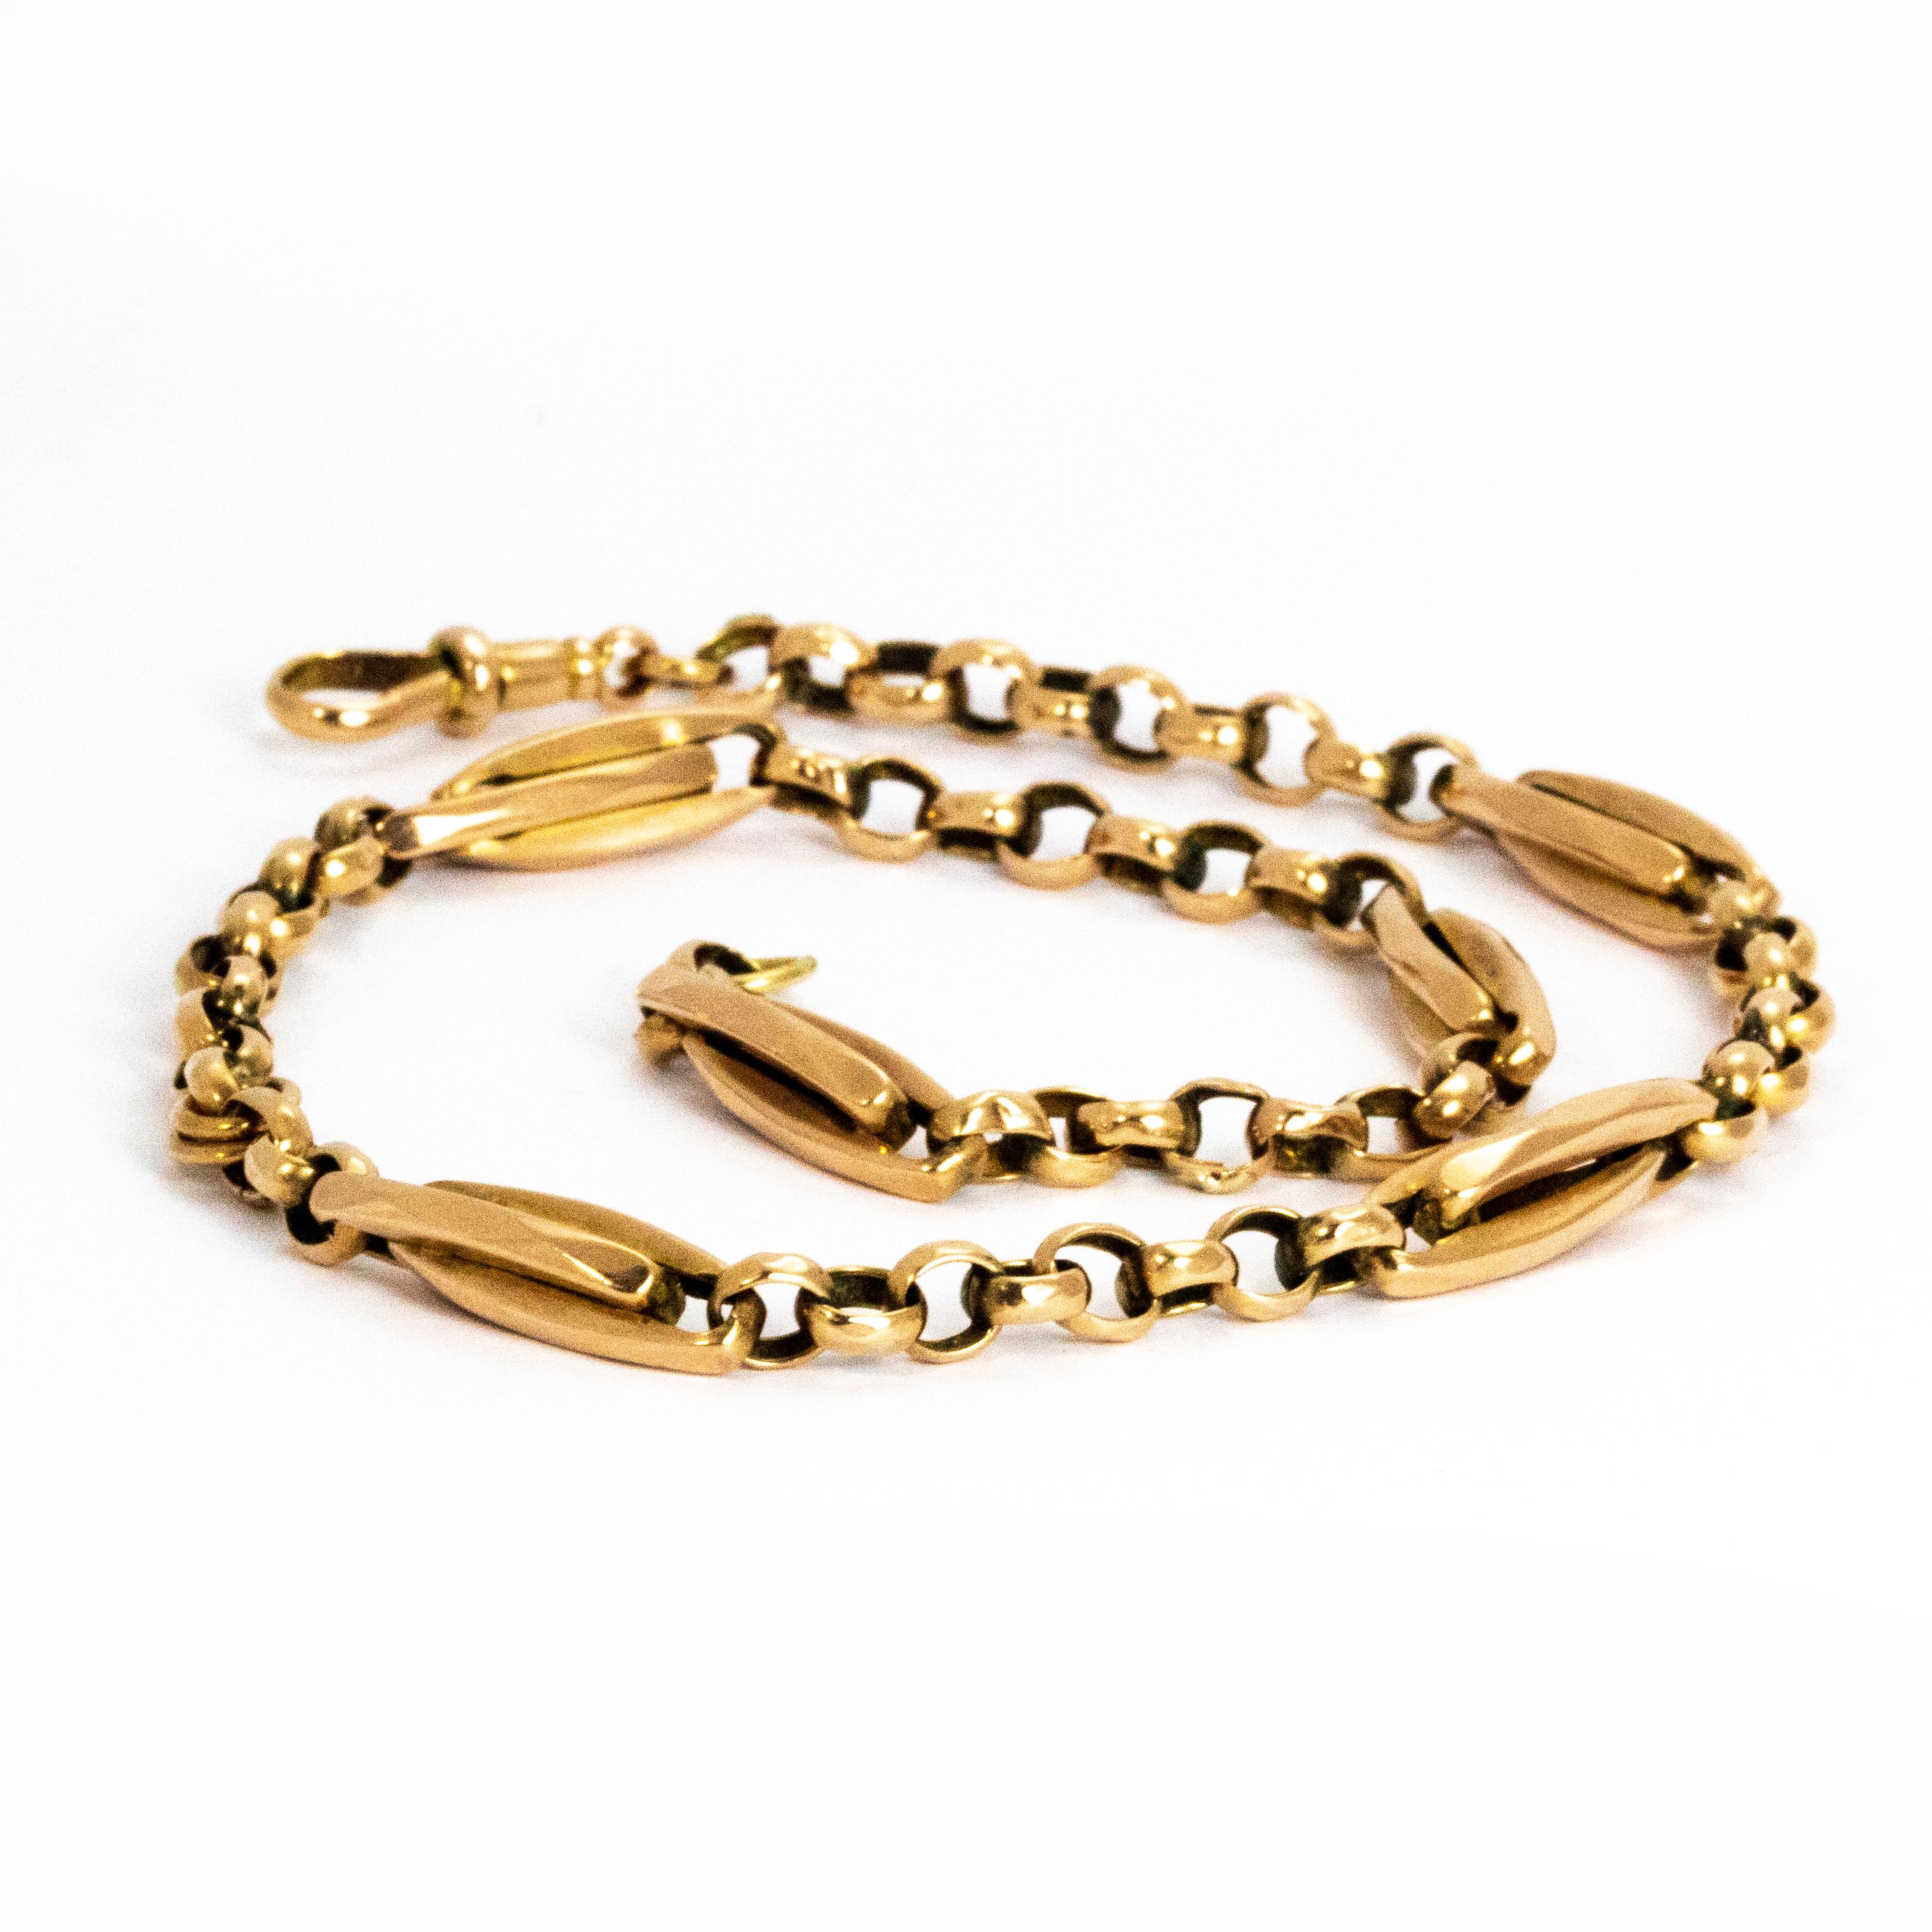 This Albert chain has chunky and decorative links connected with a simple chain. Modelled in 9ct gold. This chain is very versatile and can be used as a necklace or wrapped around the wrist to make a bracelet.

Length: 14 1/2 inches 